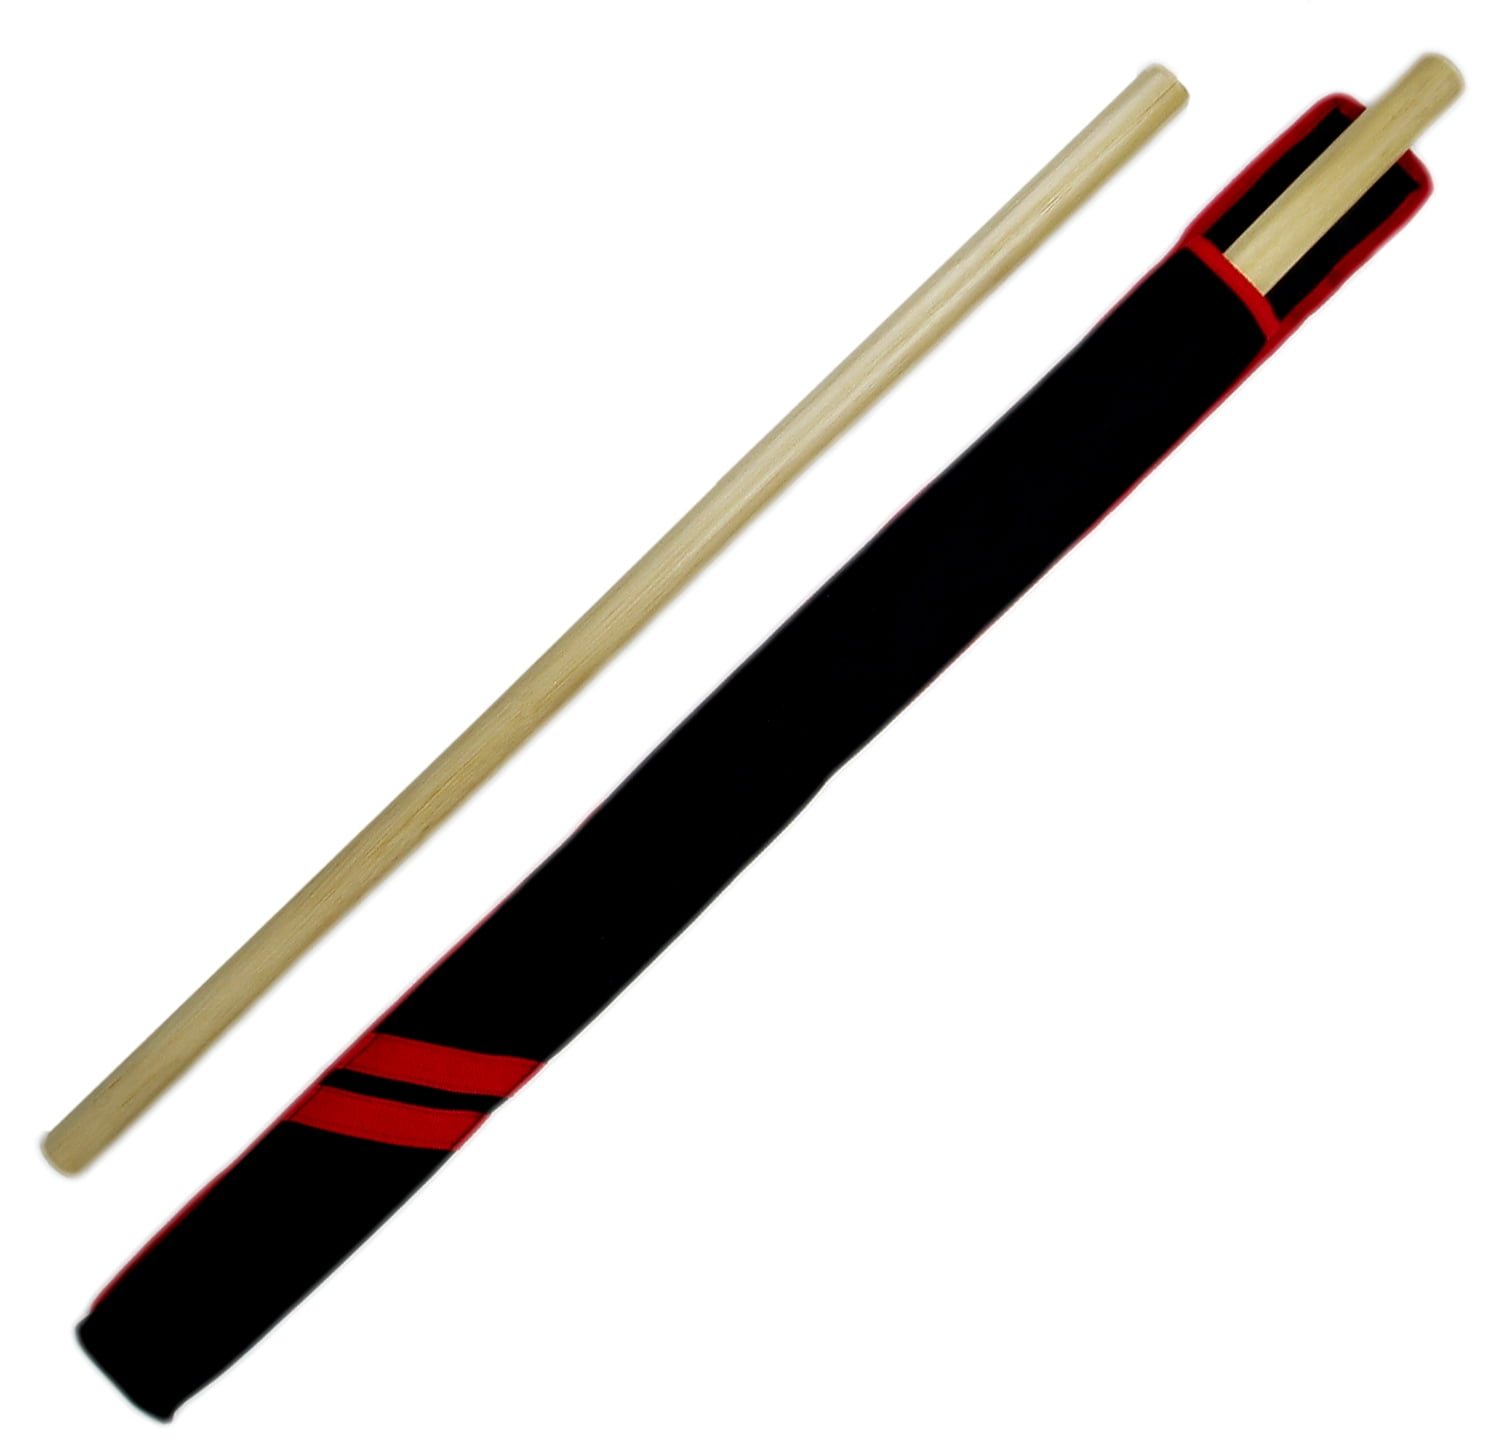 Pair Foam Padded Training Escrima Stick with Free Carry Case Bag 